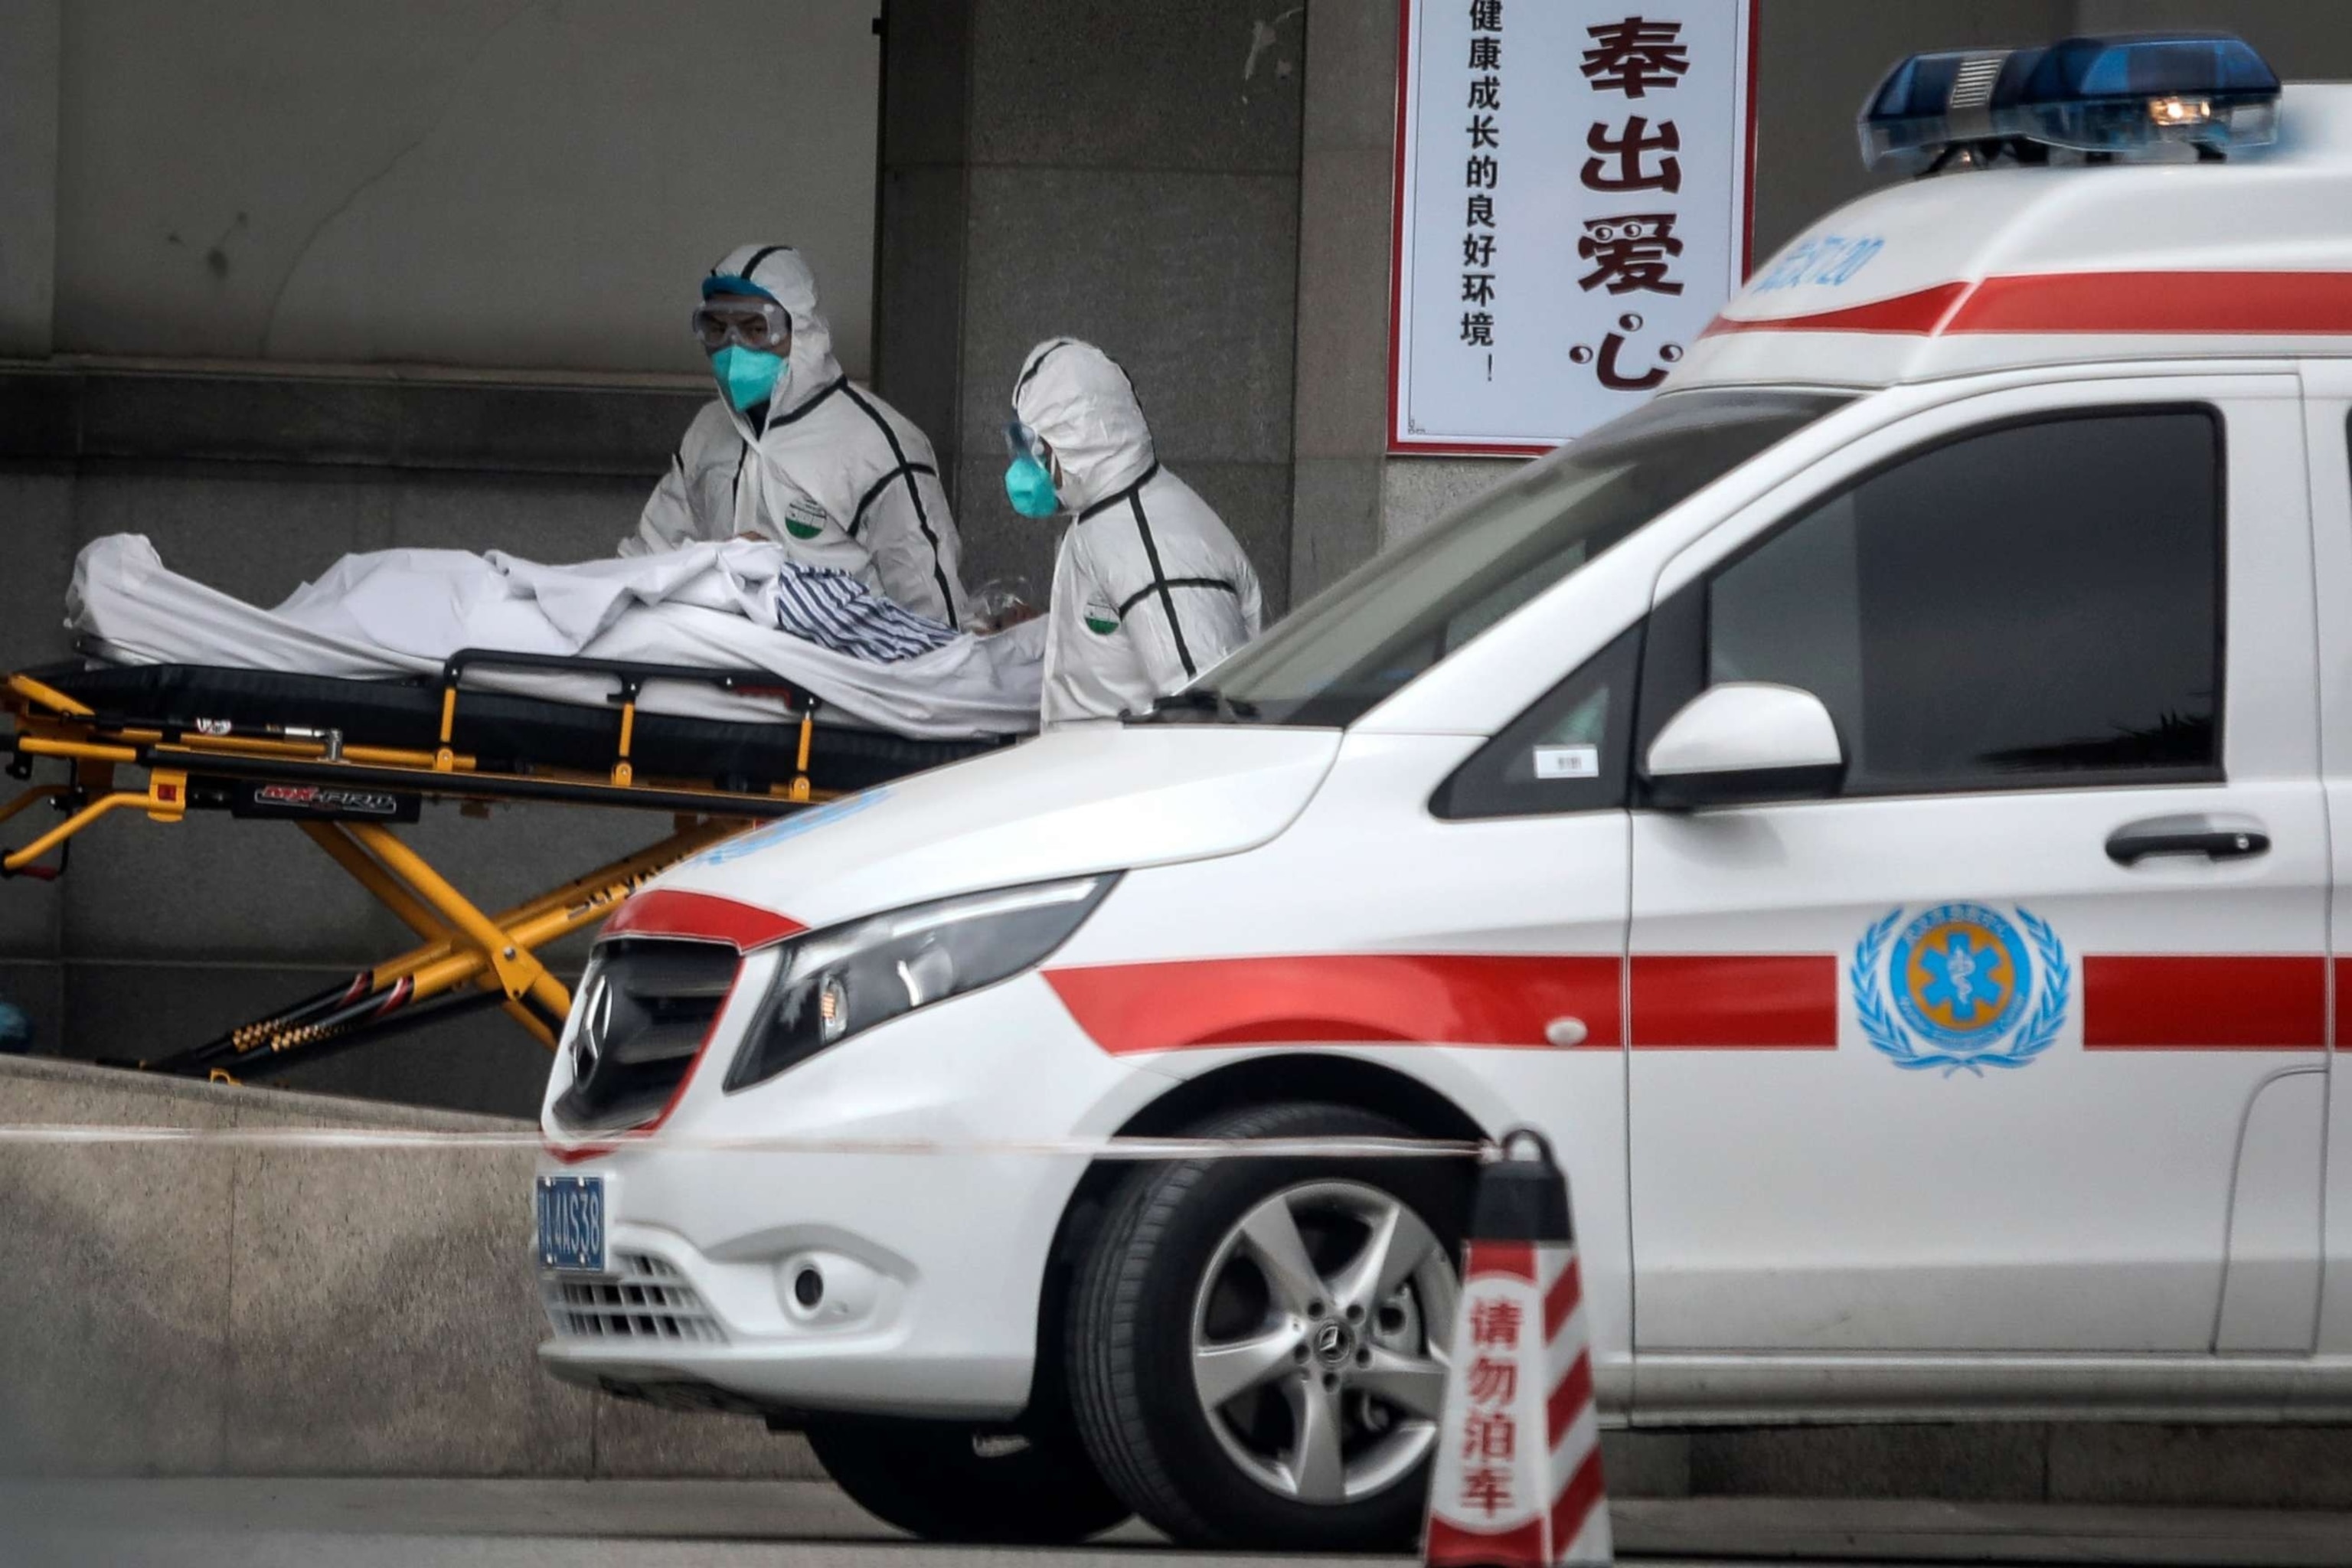 PHOTO: In this Jan. 17, 2020, file photo, medical staff transfer patients to Jin Yintan hospital in Wuhan, Hubei, China, after a second person in the city had died of a pneumonia-like virus since the outbreak started in December.